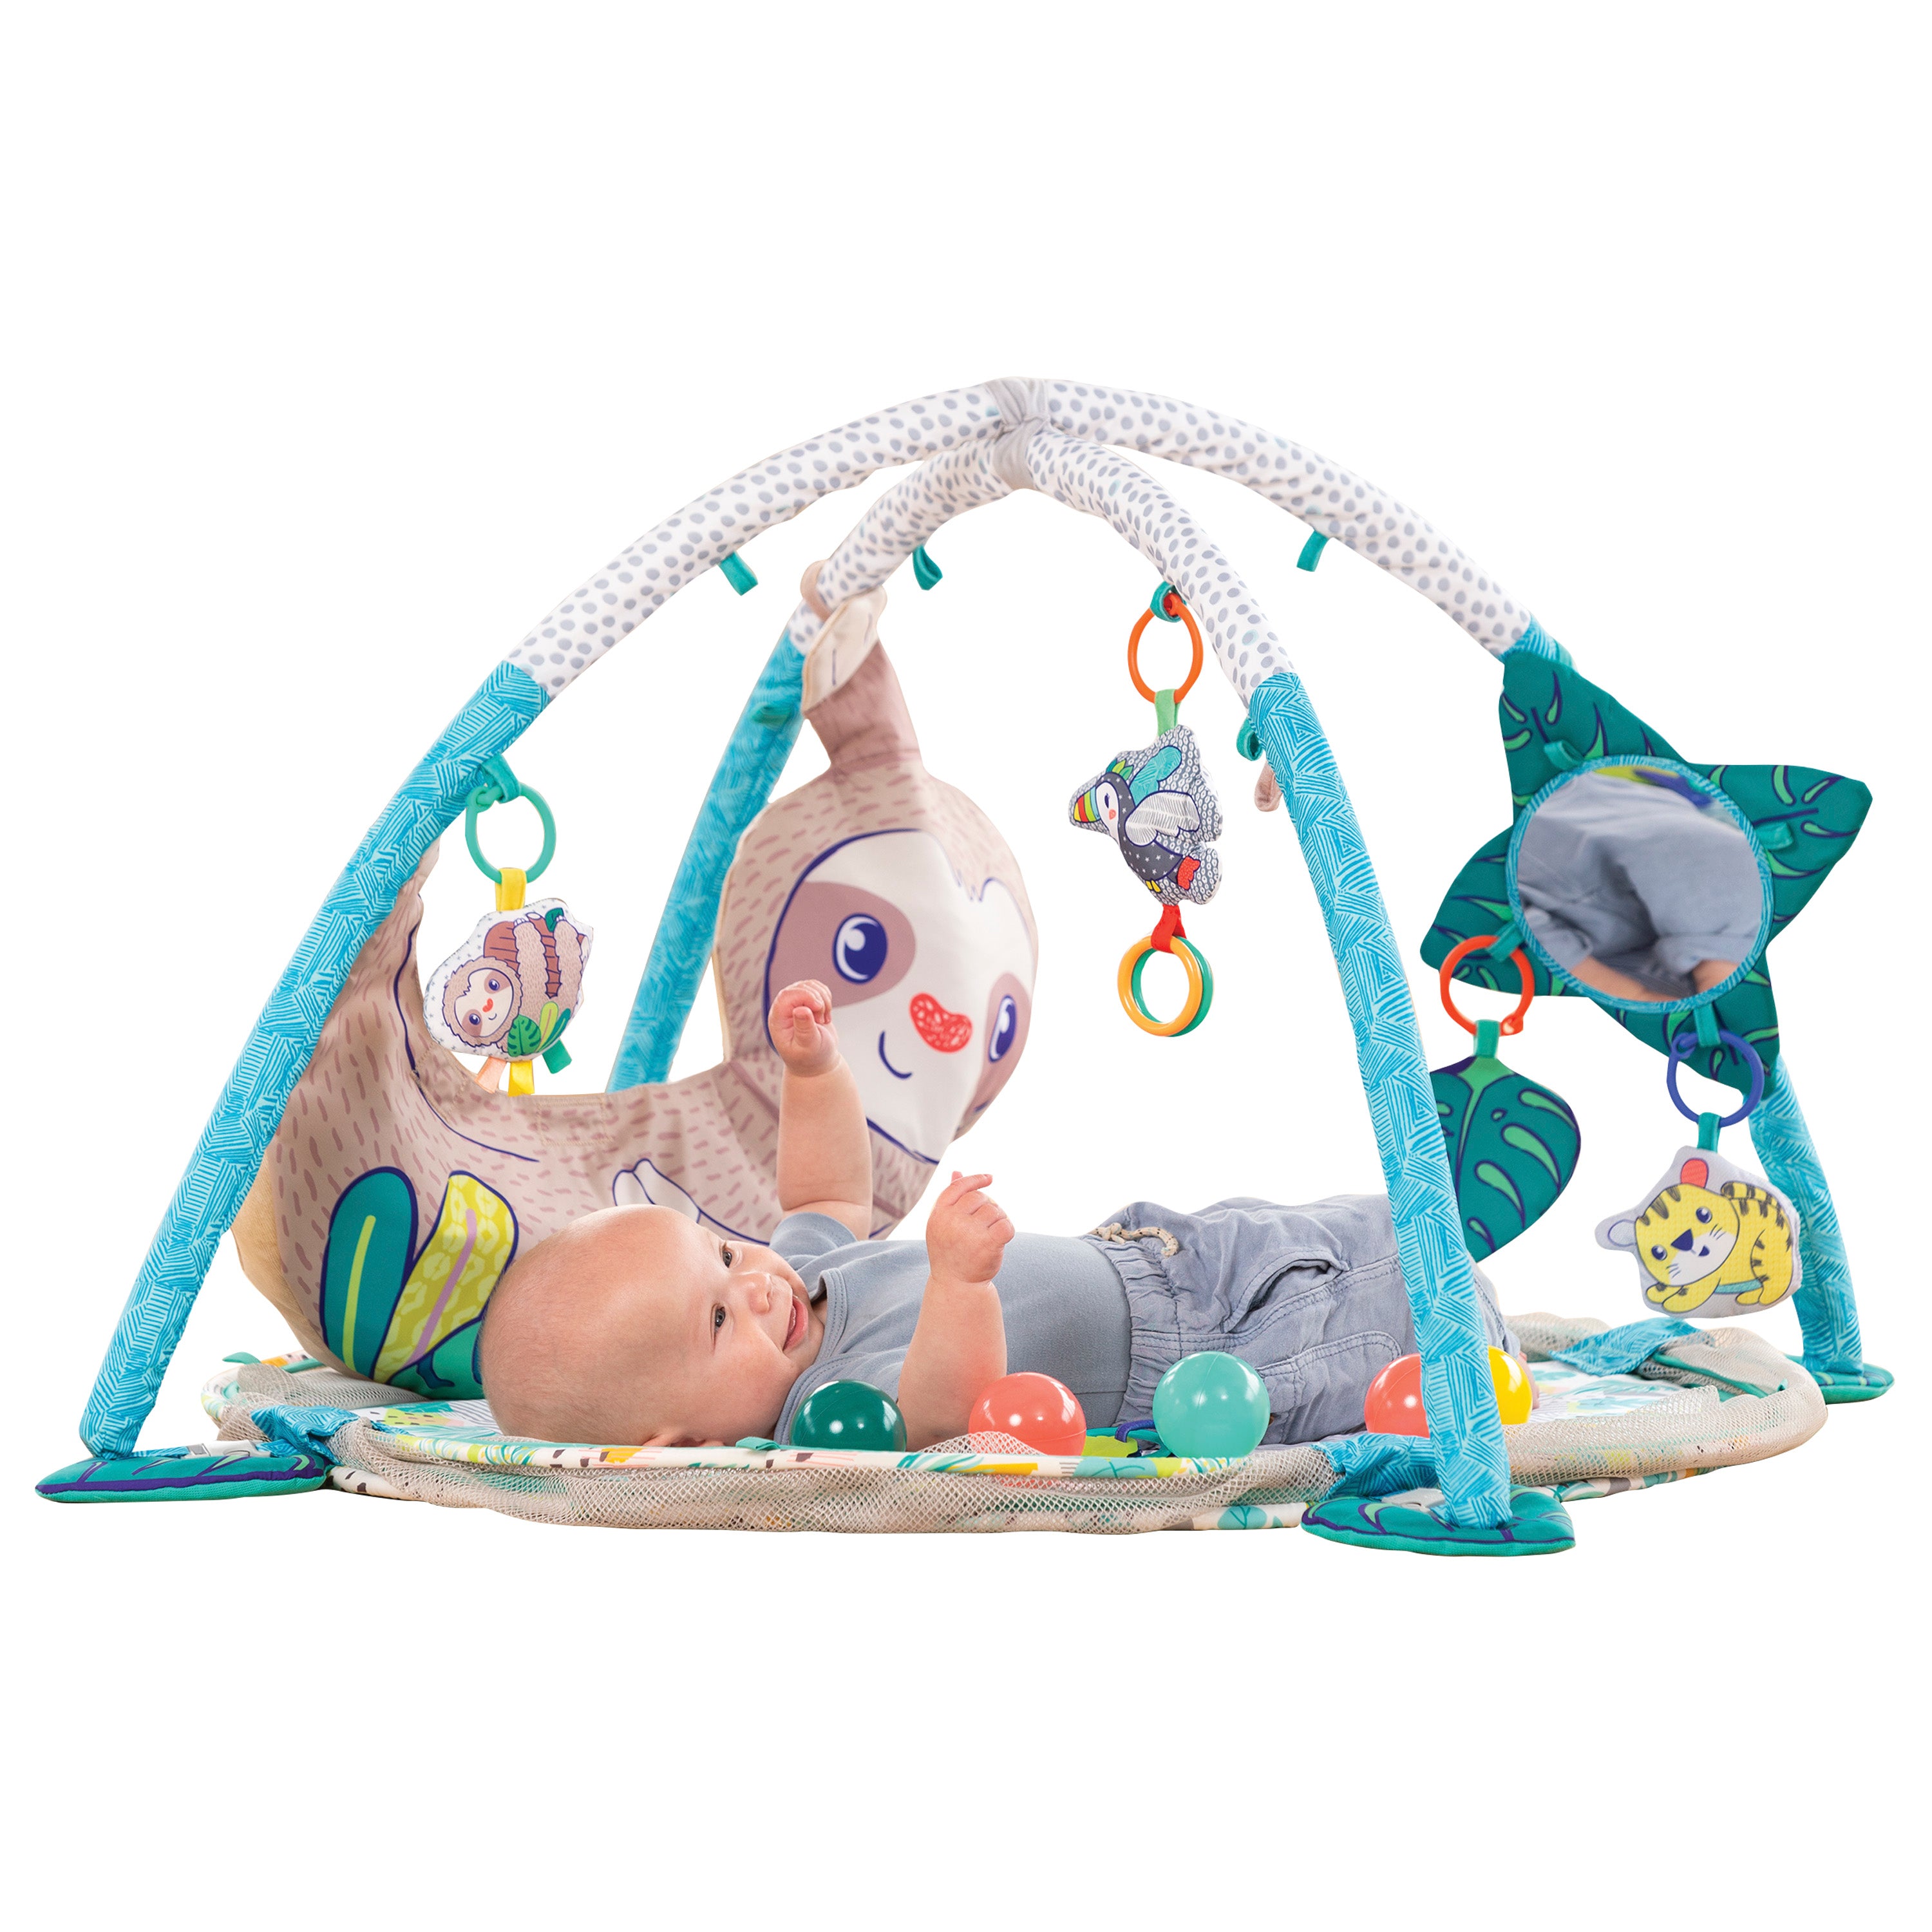 Activity Gym & Ball Pit 4-in-1 Jumbo Baby Cute Sloth Animal Design New Infantino-baby activity gym-AULEY